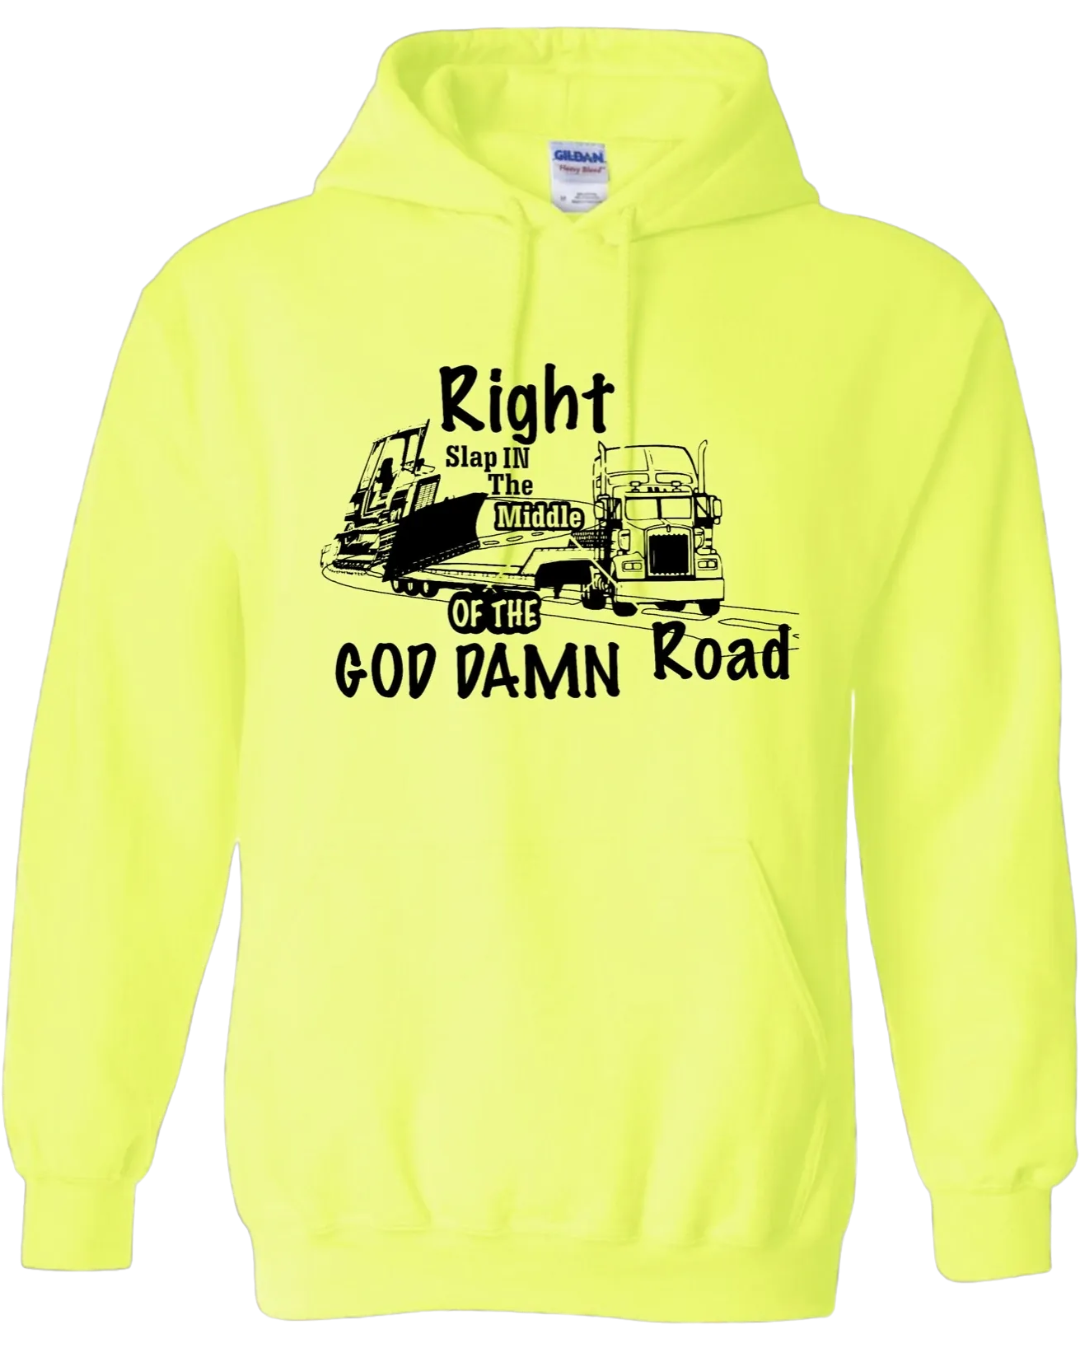 Middle Of The Road Hoodie